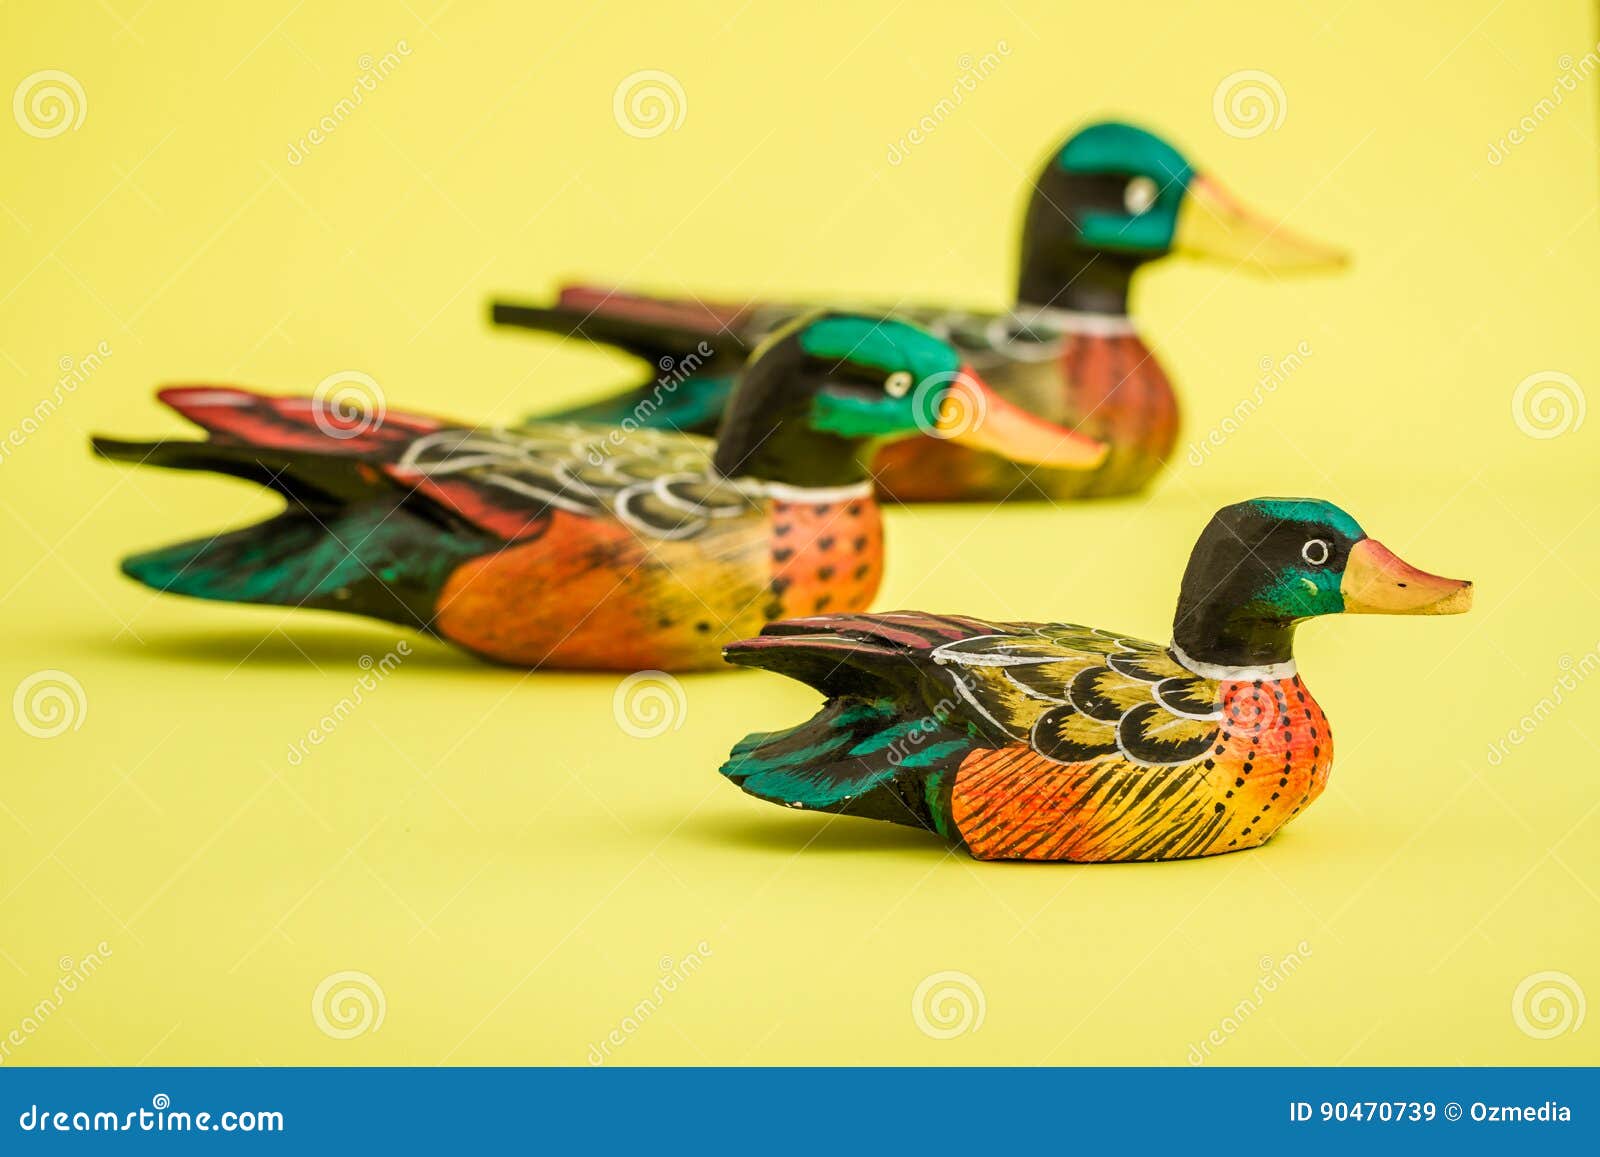 Hand Made Wooden Ducks For Home Decoration On Yellow ...